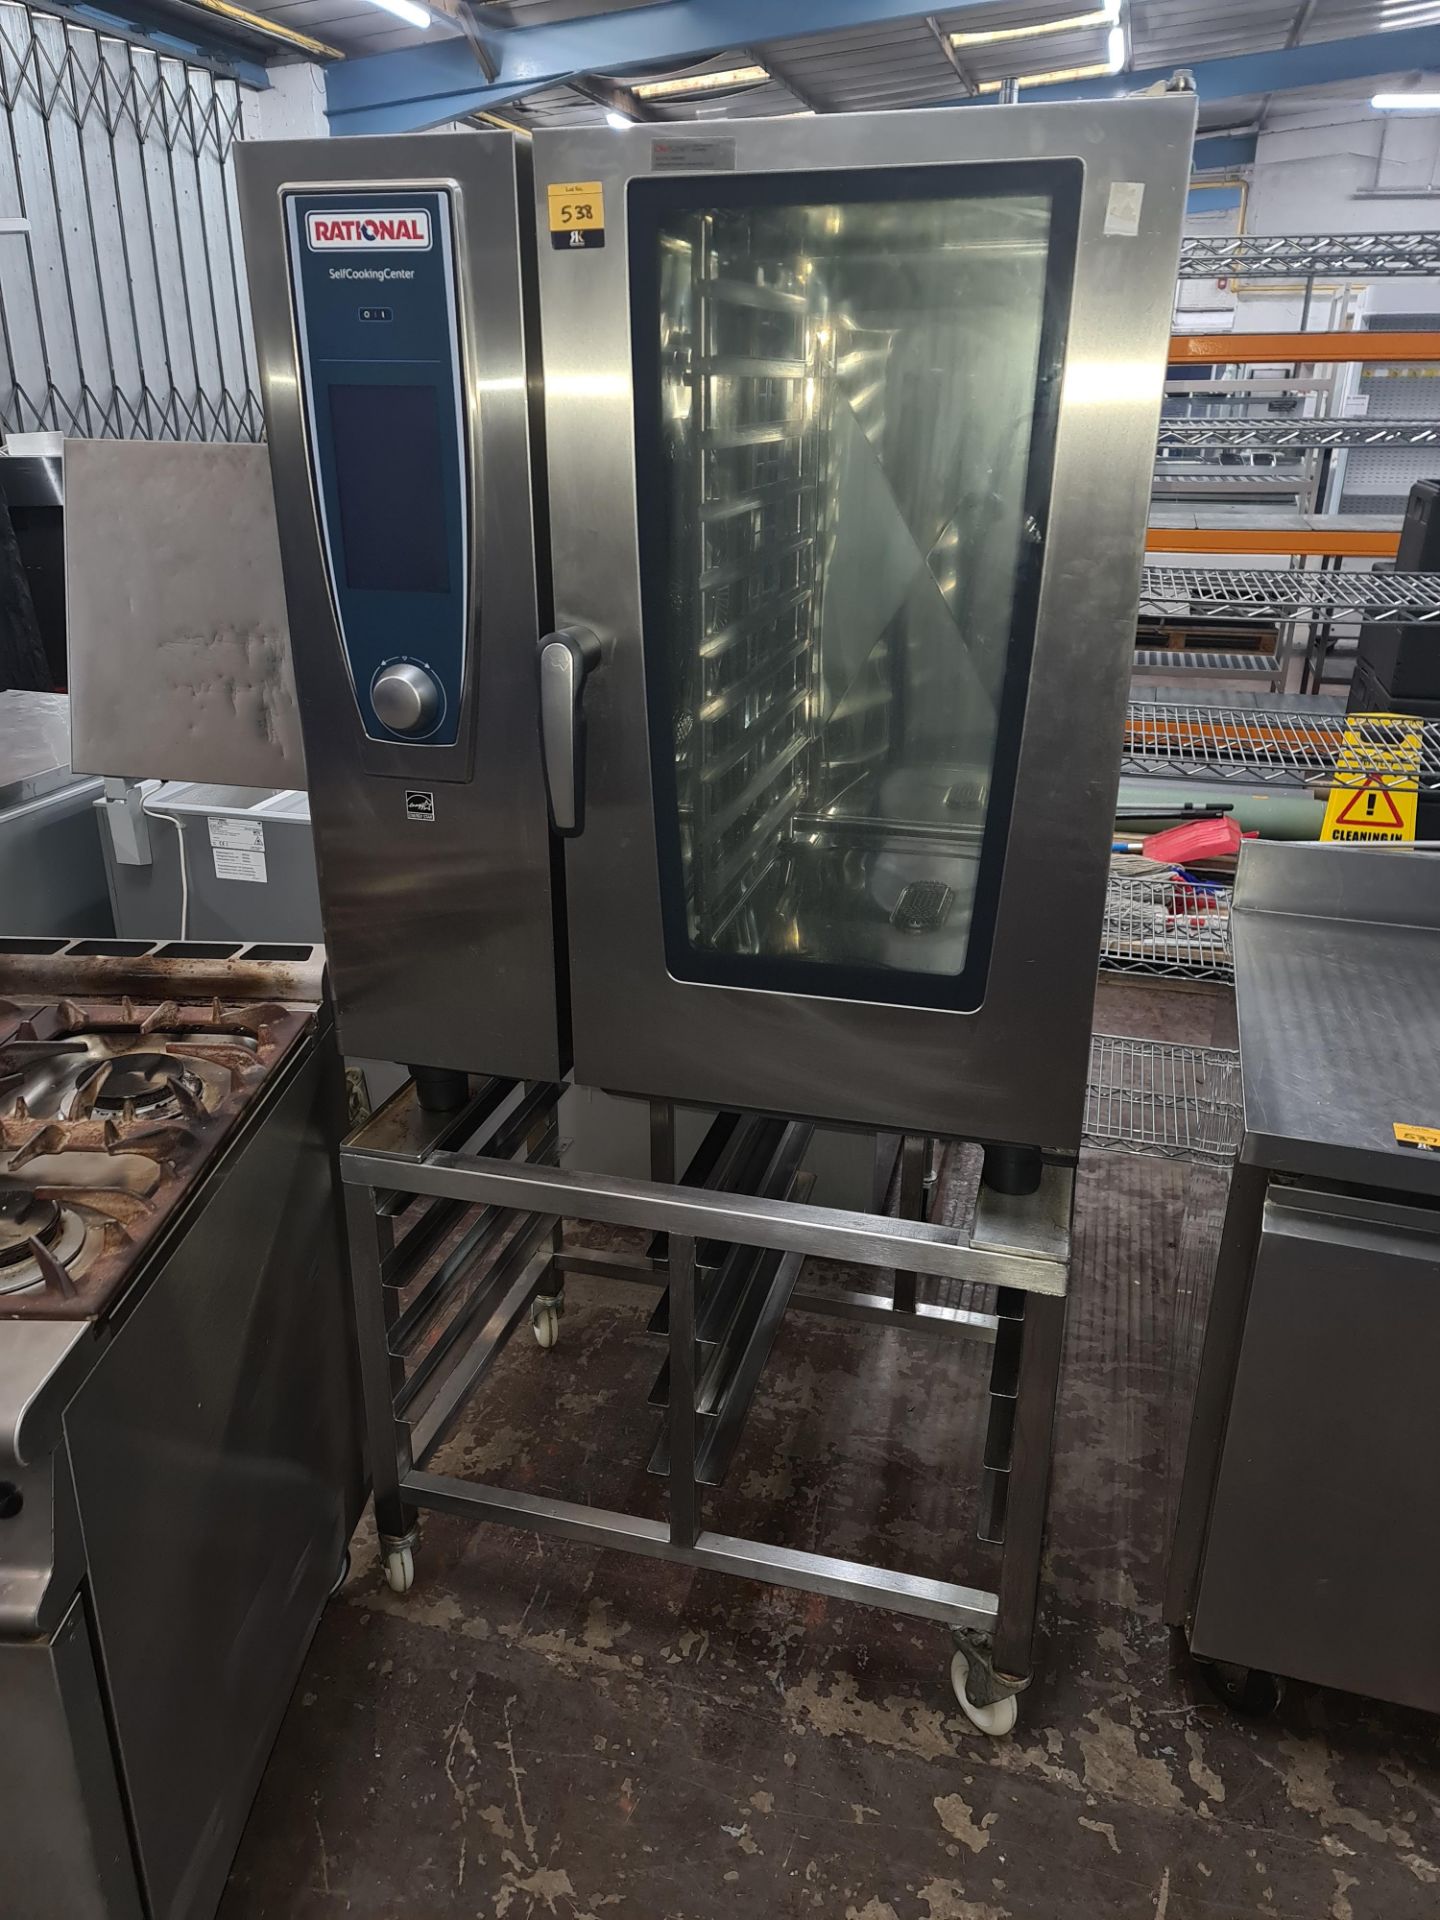 Rational self-cooking centre 10-grid oven model SCCWE101 including dedicated mobile stand with tray